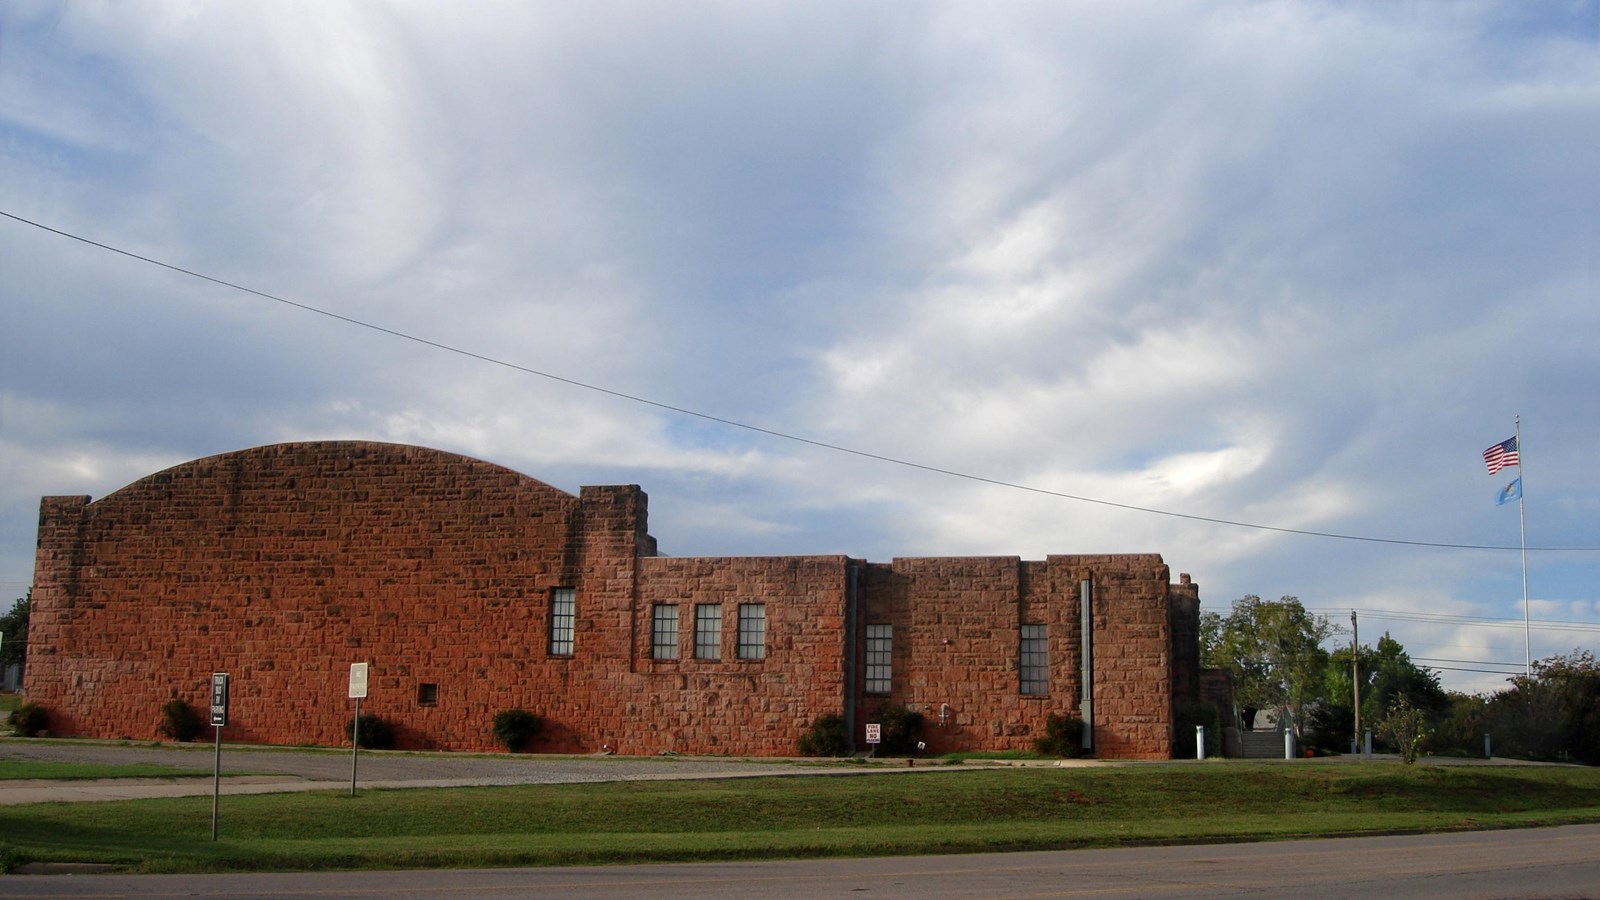 A large red brick building with an arched roof.